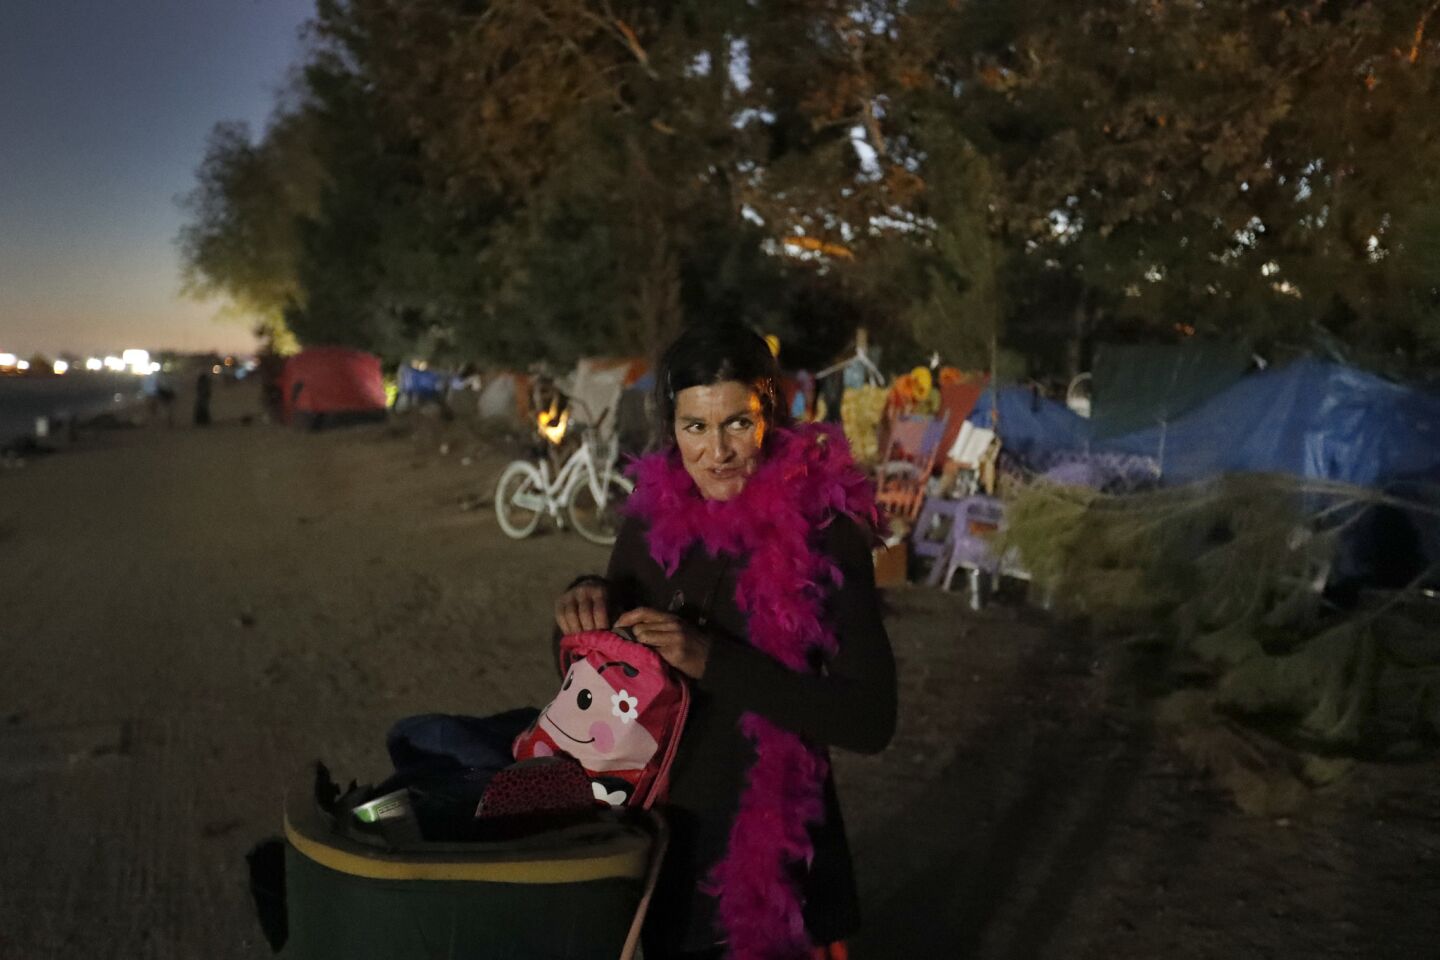 Linda O'Reilly, who has been homeless for five years, moves her belongings out of the large encampment along the Santa Ana River trail.